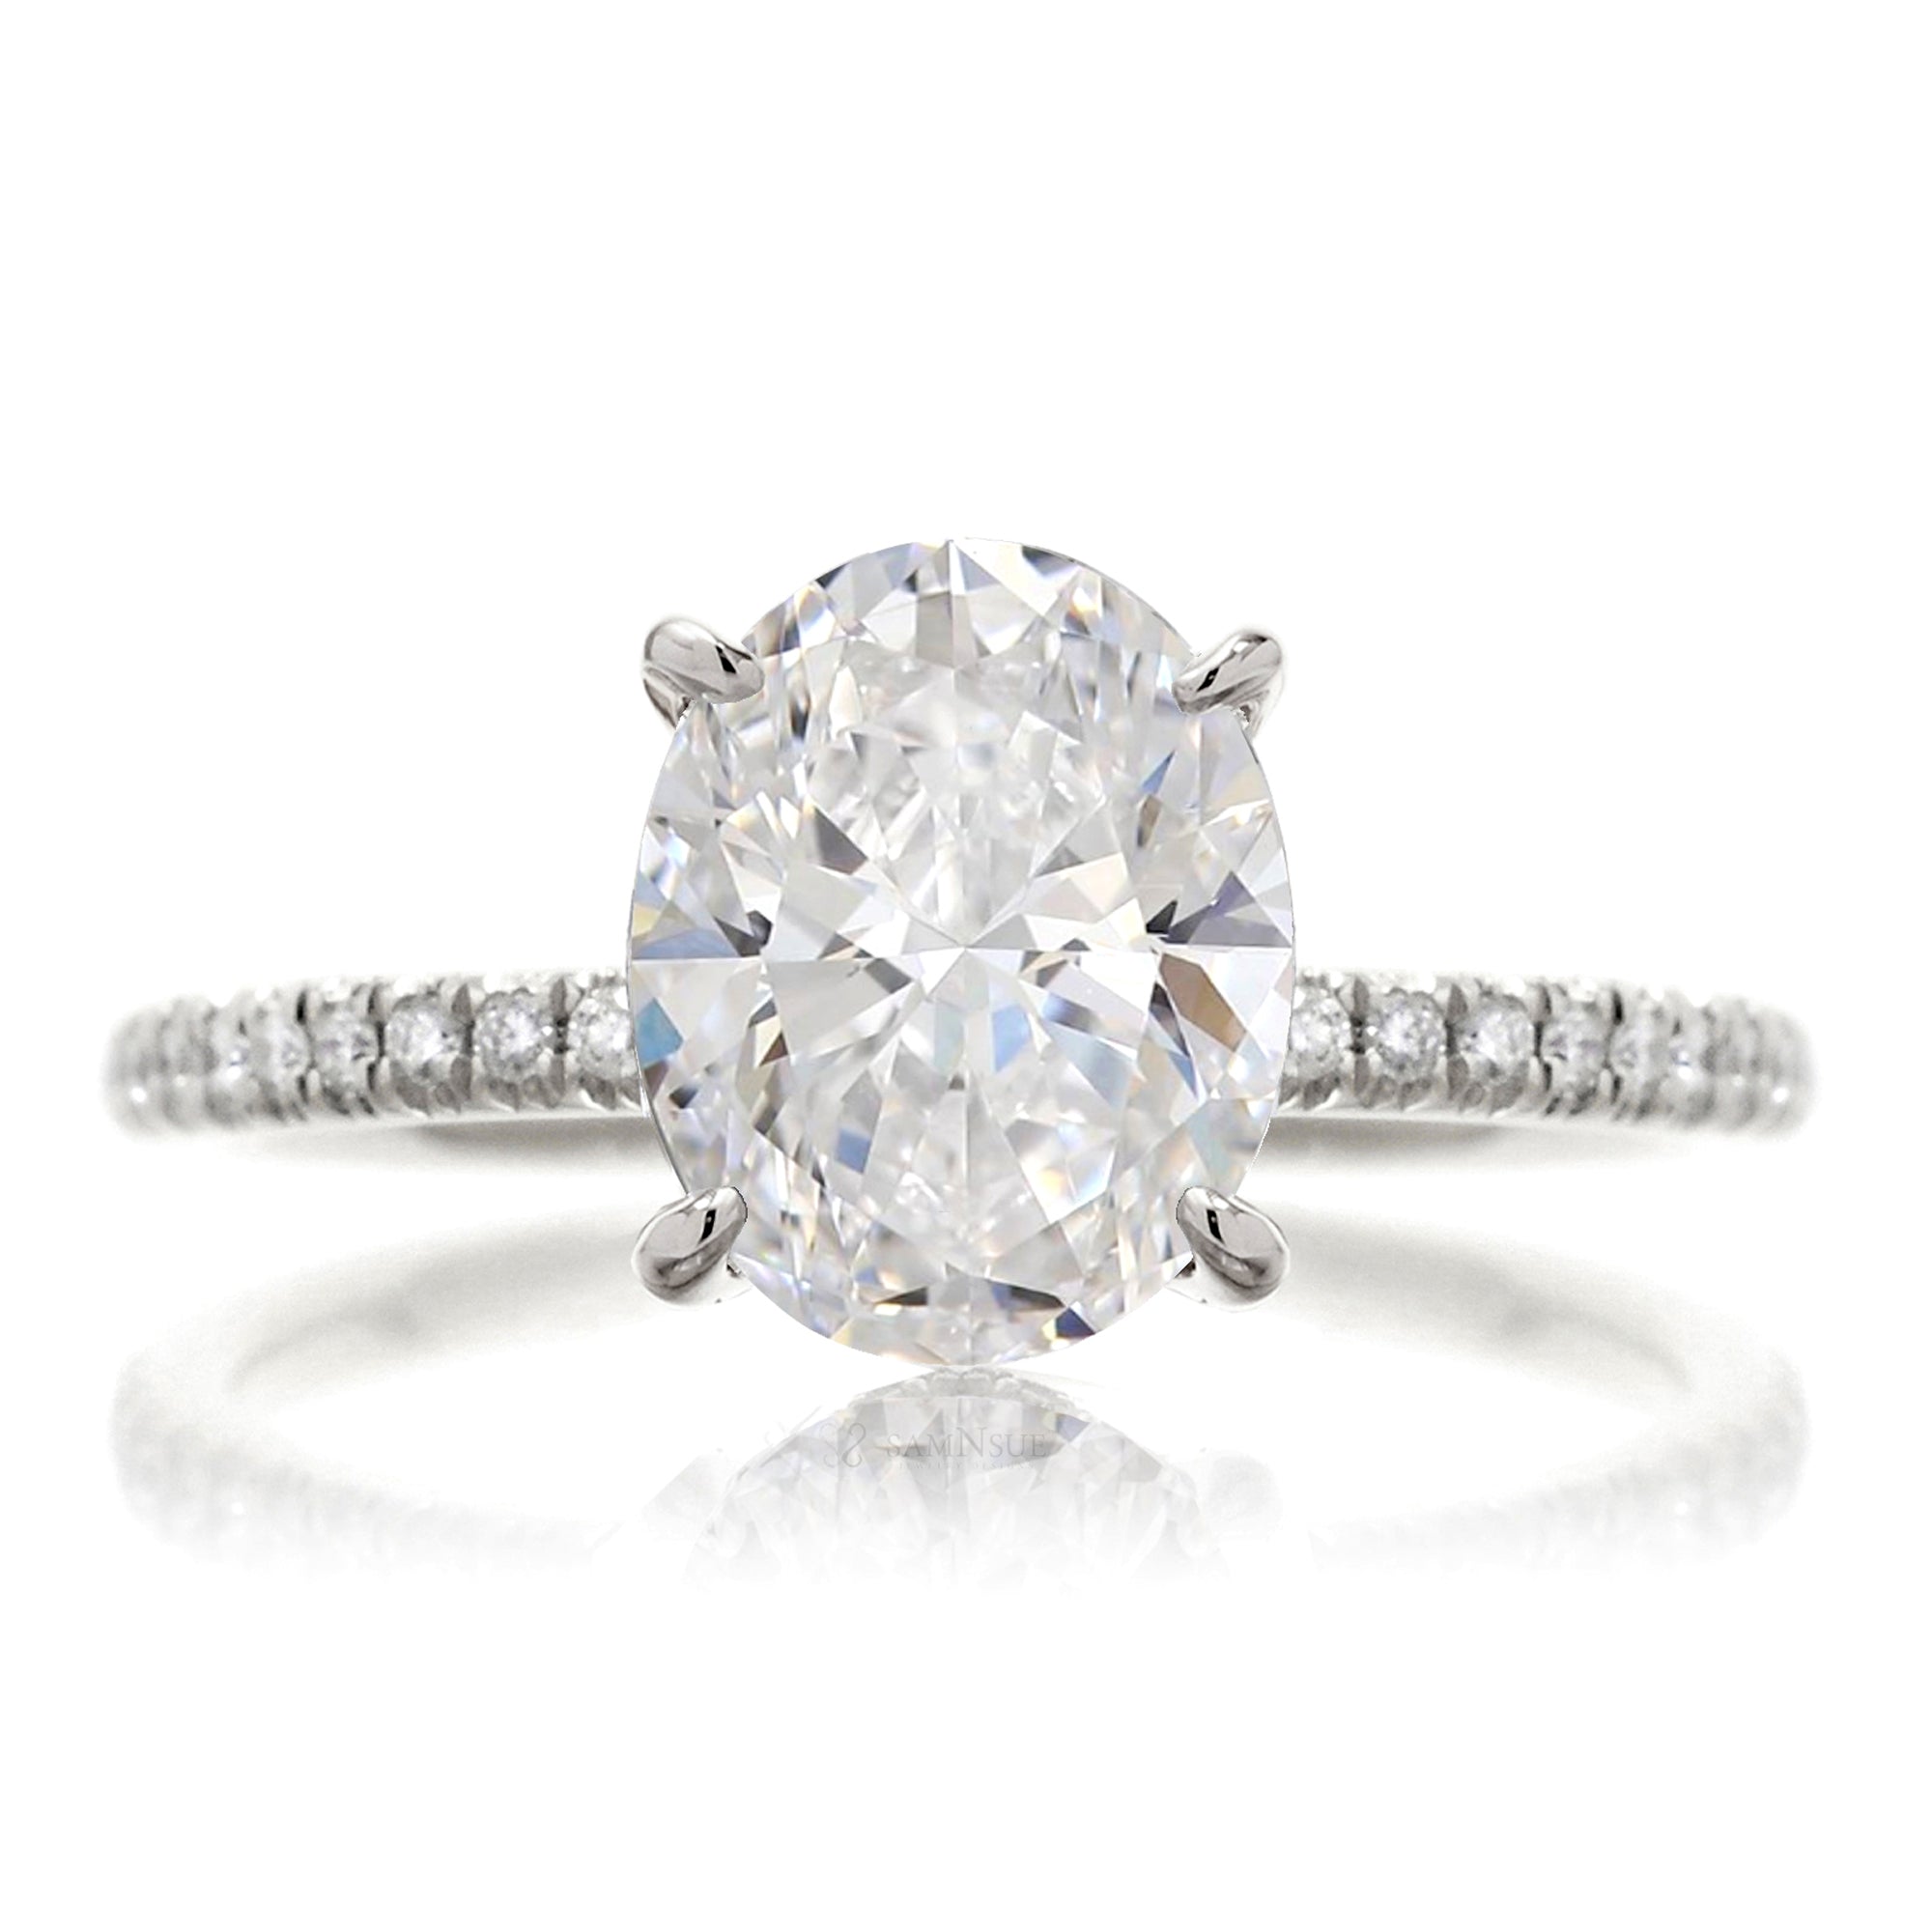 Oval cut lab-grown diamond engagement ring white gold - The Ava